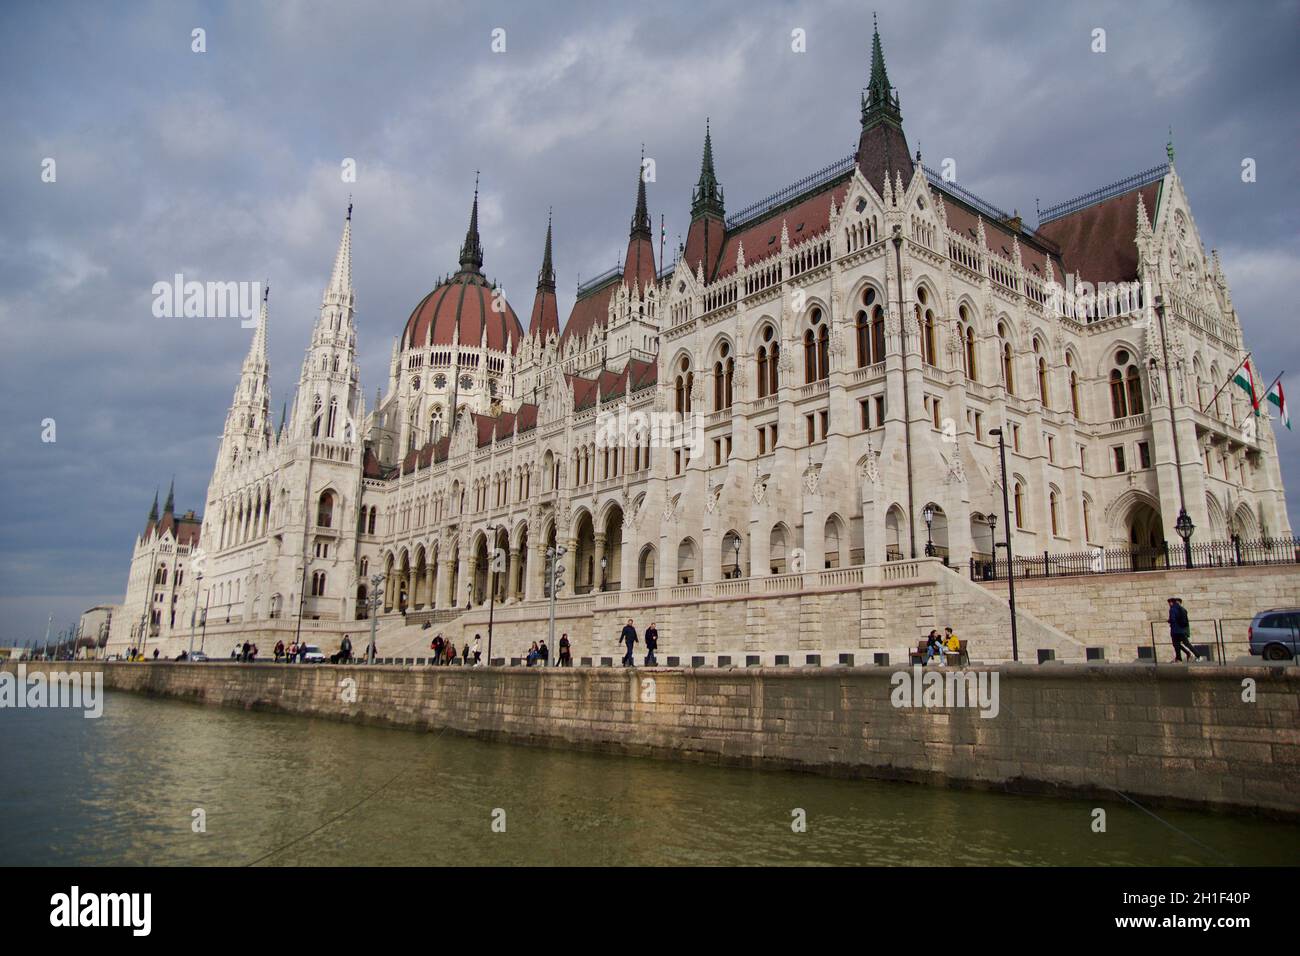 BUDAPEST, HUNGARY - 03 MAR 2019: Exterior view of the Parliament building of Hungary on the Danube. The Hungarian Parliament, richly decorated inside Stock Photo